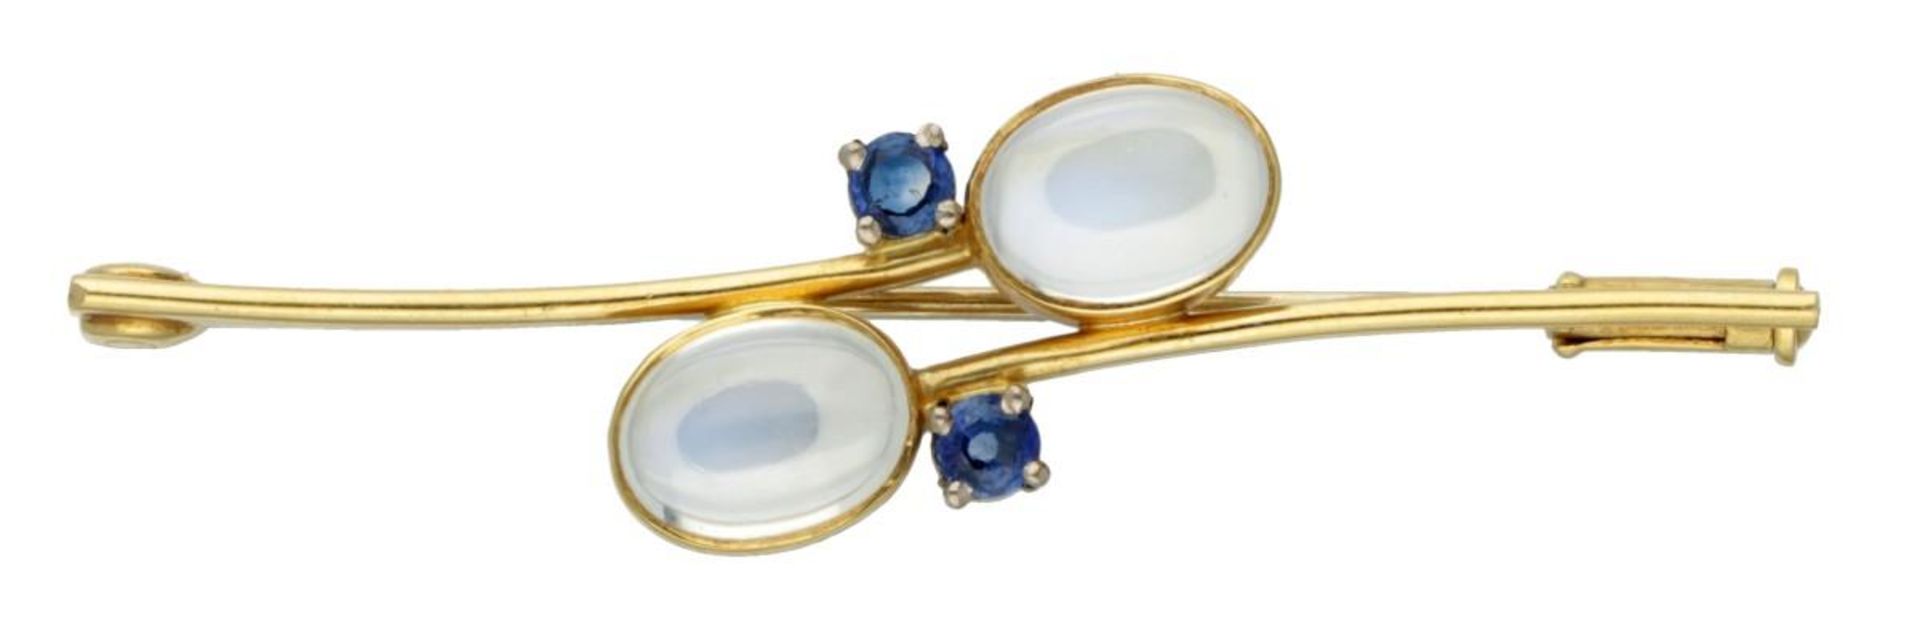 18K. Yellow gold brooch set with moonstone and sapphire.